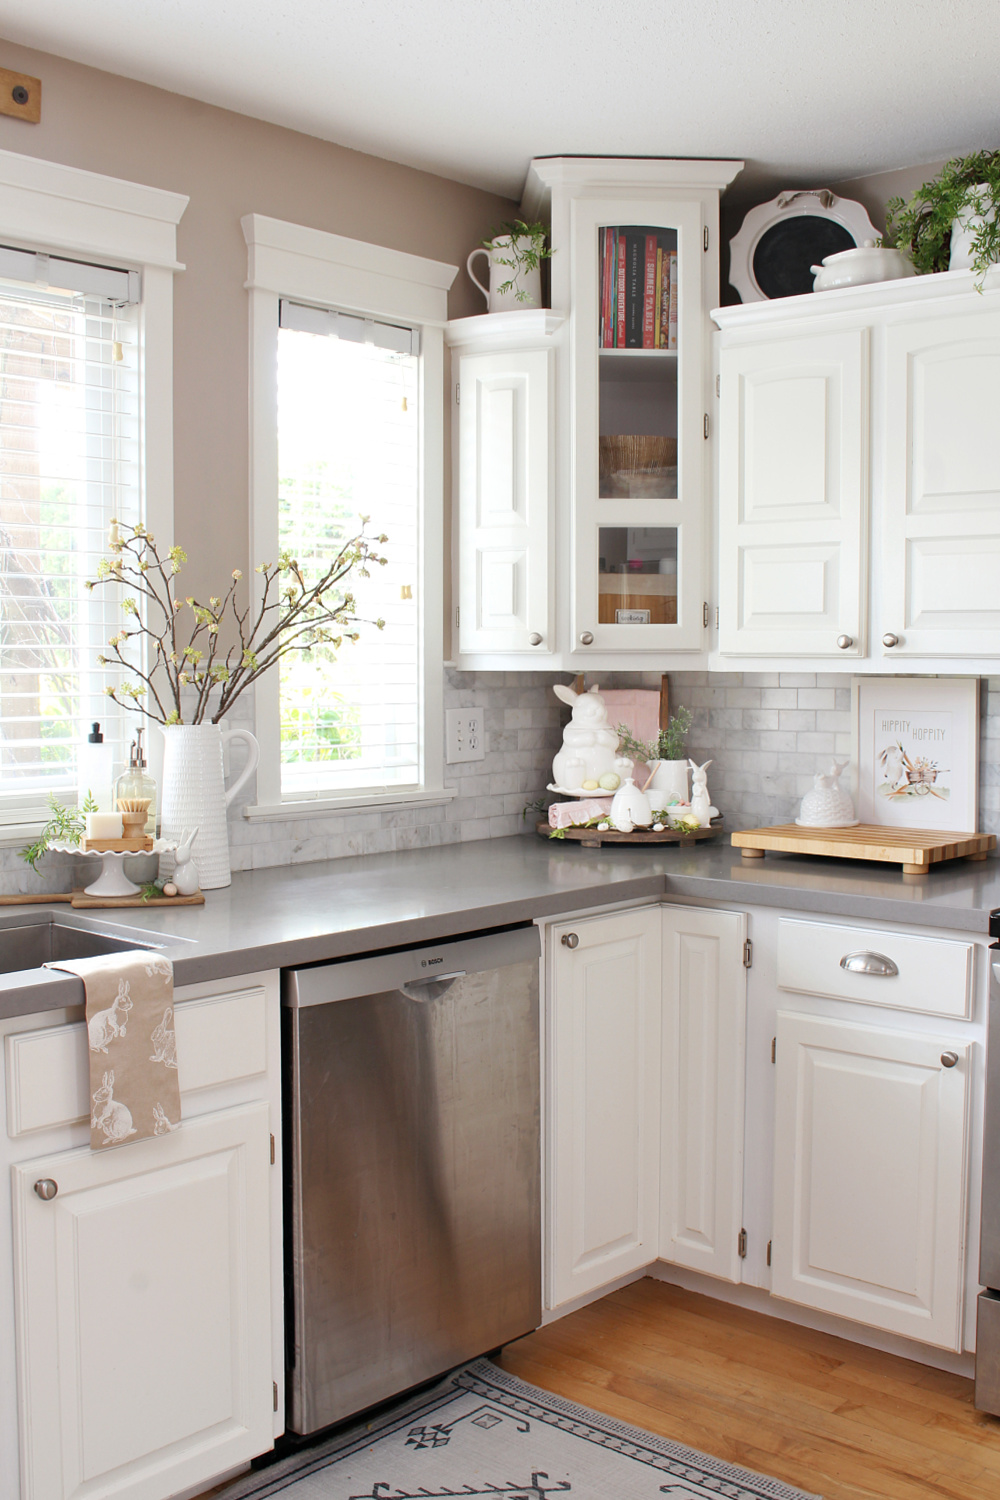 Kitchen Spring Decor Ideas on a Budget - MY 100 YEAR OLD HOME